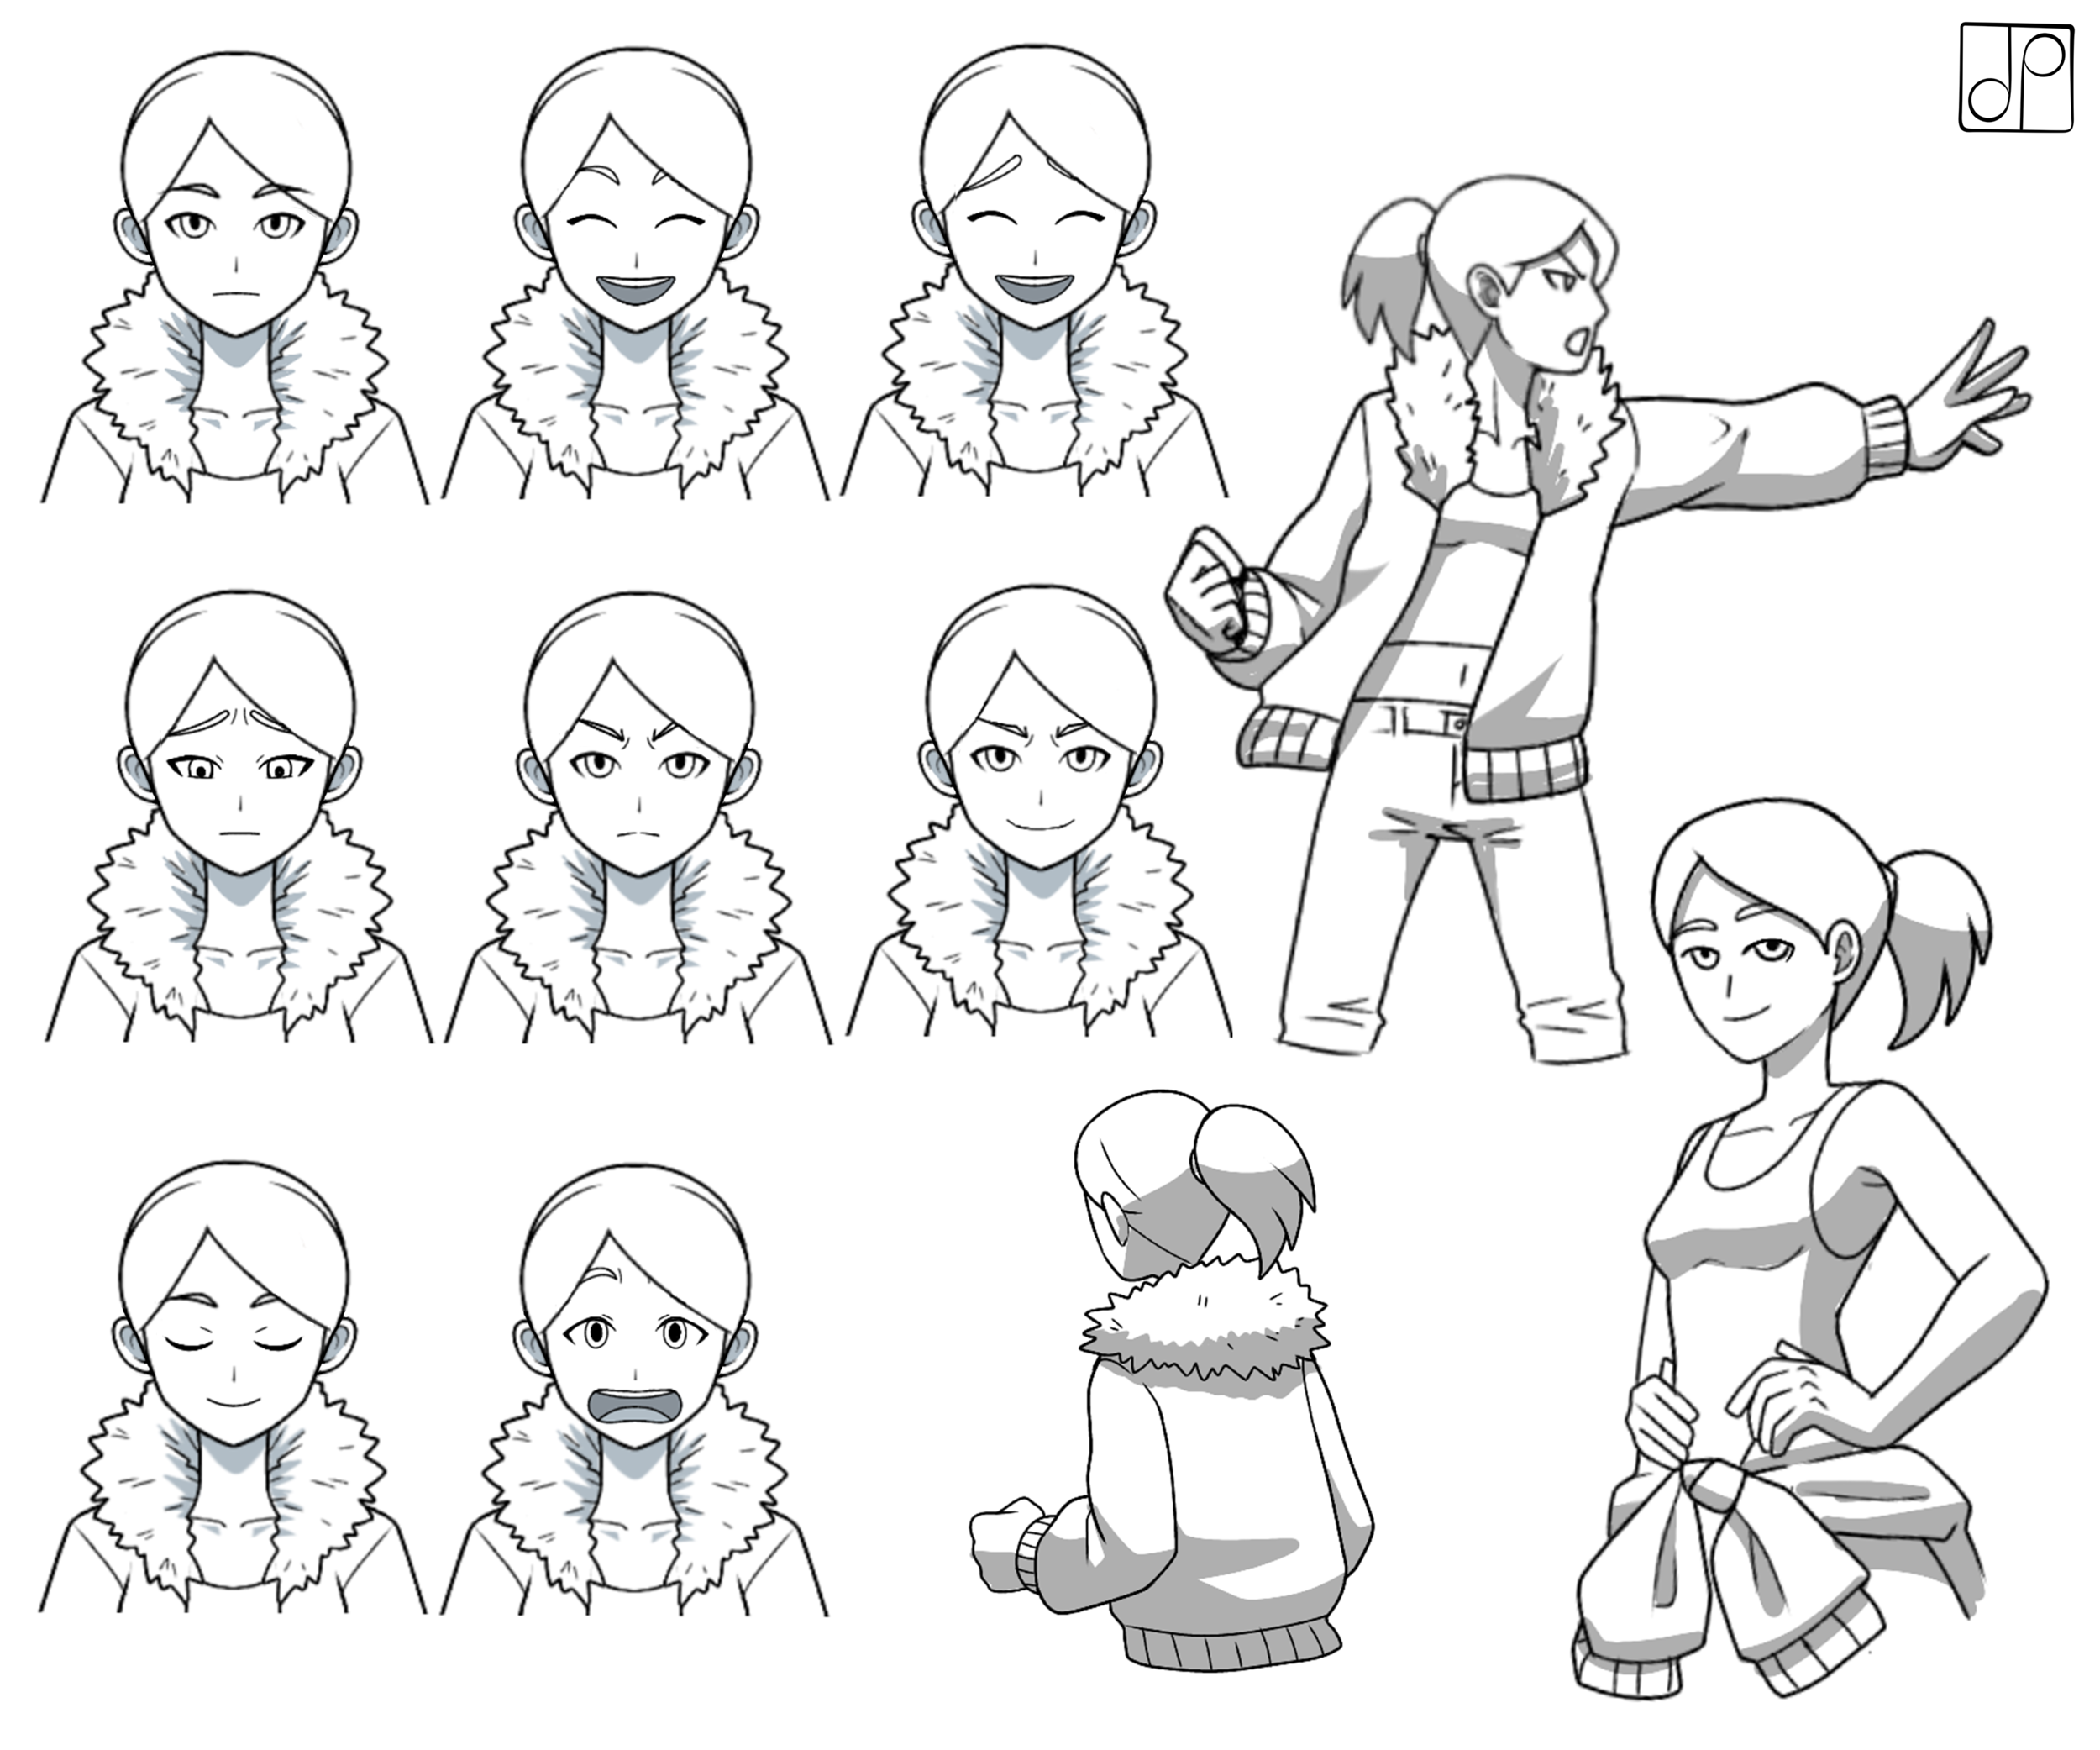 Female_Protagonist_Personality_Sketch.png